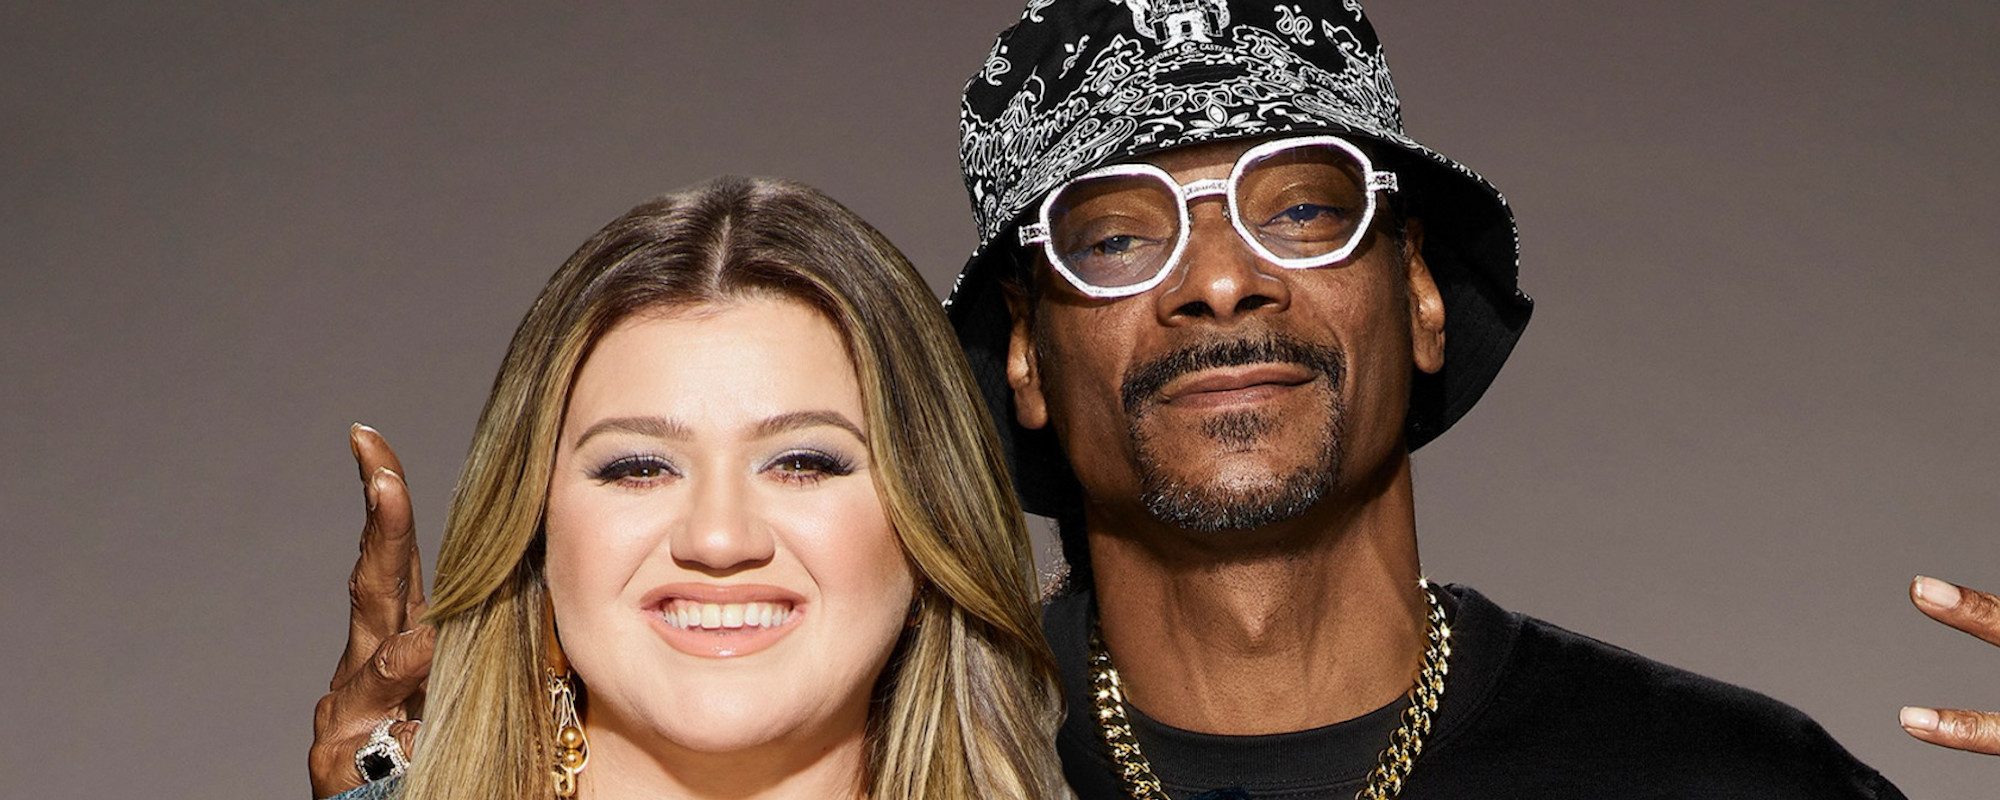 Snoop Dogg and Kelly Clarkson to Host TV Competition ‘American Song Contest’